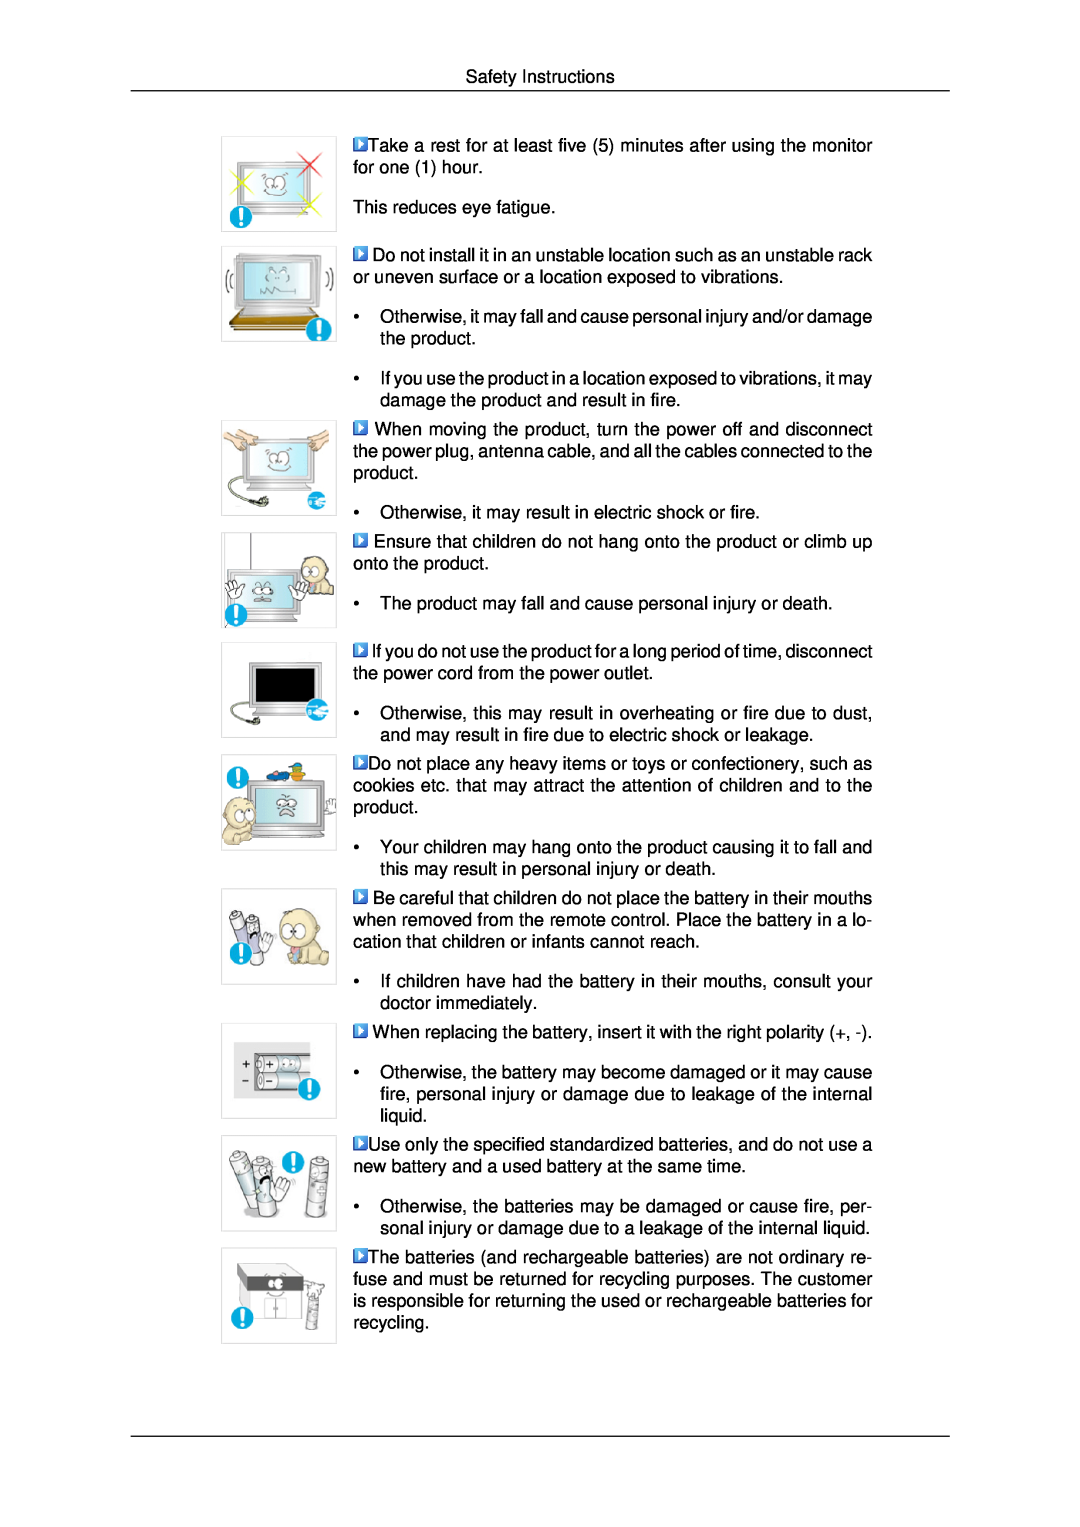 Samsung LH82BVTMBF/EN Safety Instructions, This reduces eye fatigue, Otherwise, it may result in electric shock or fire 